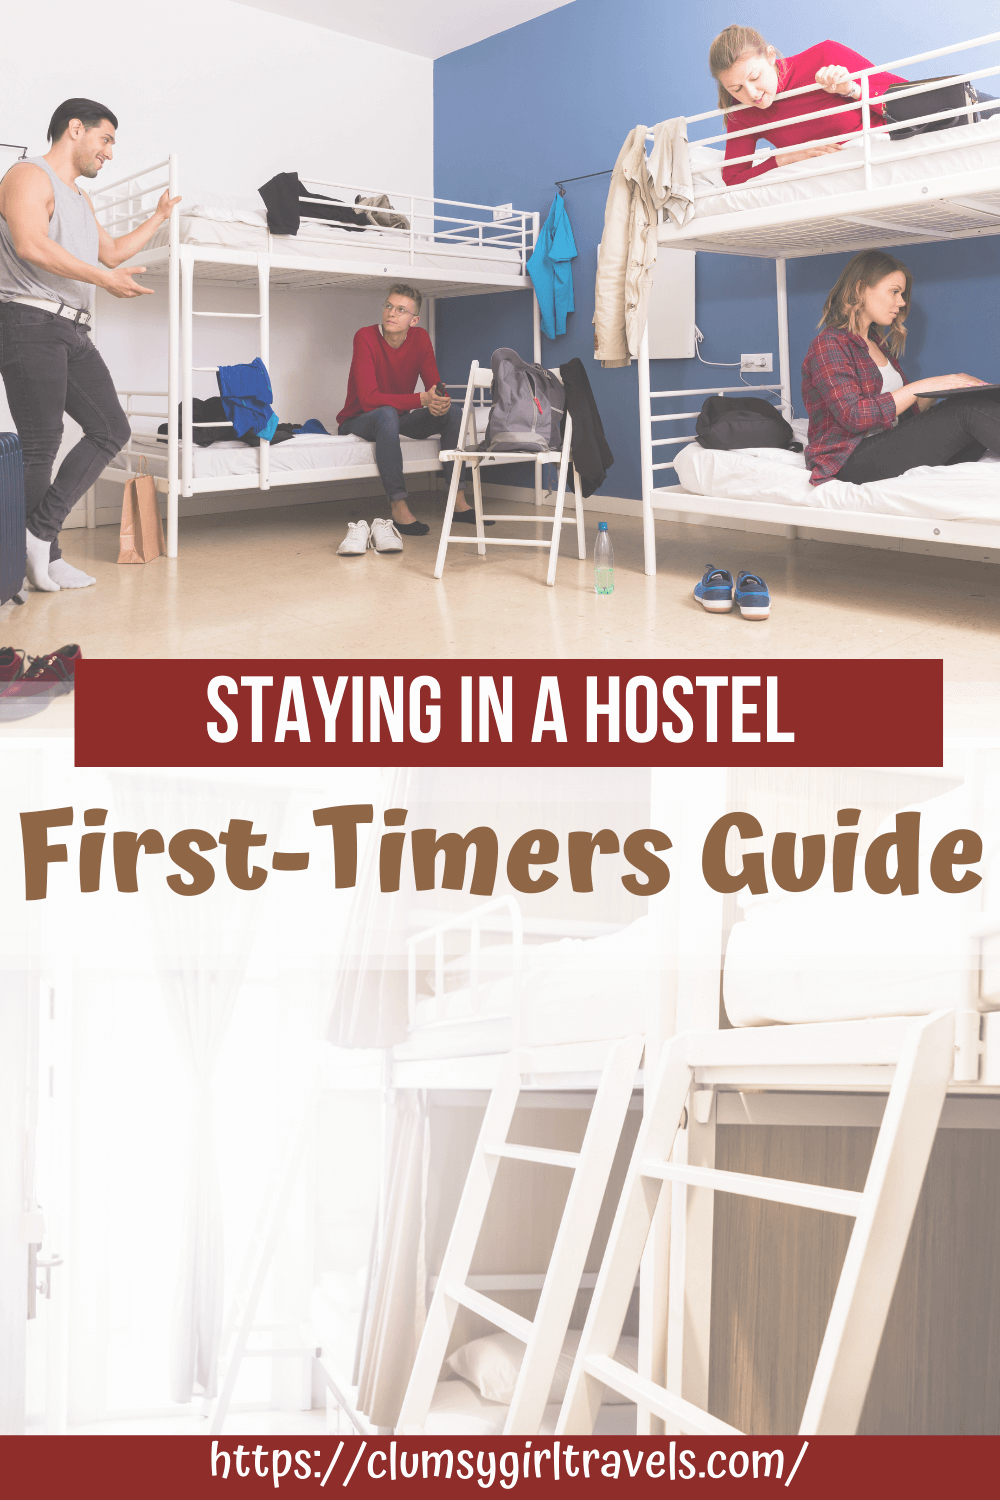 Discover what it's like staying in a hostel for the first time and why you should definitely do it, in this beginner's guide to staying in a hostel. #hostel #stayinginahostel #hostelife